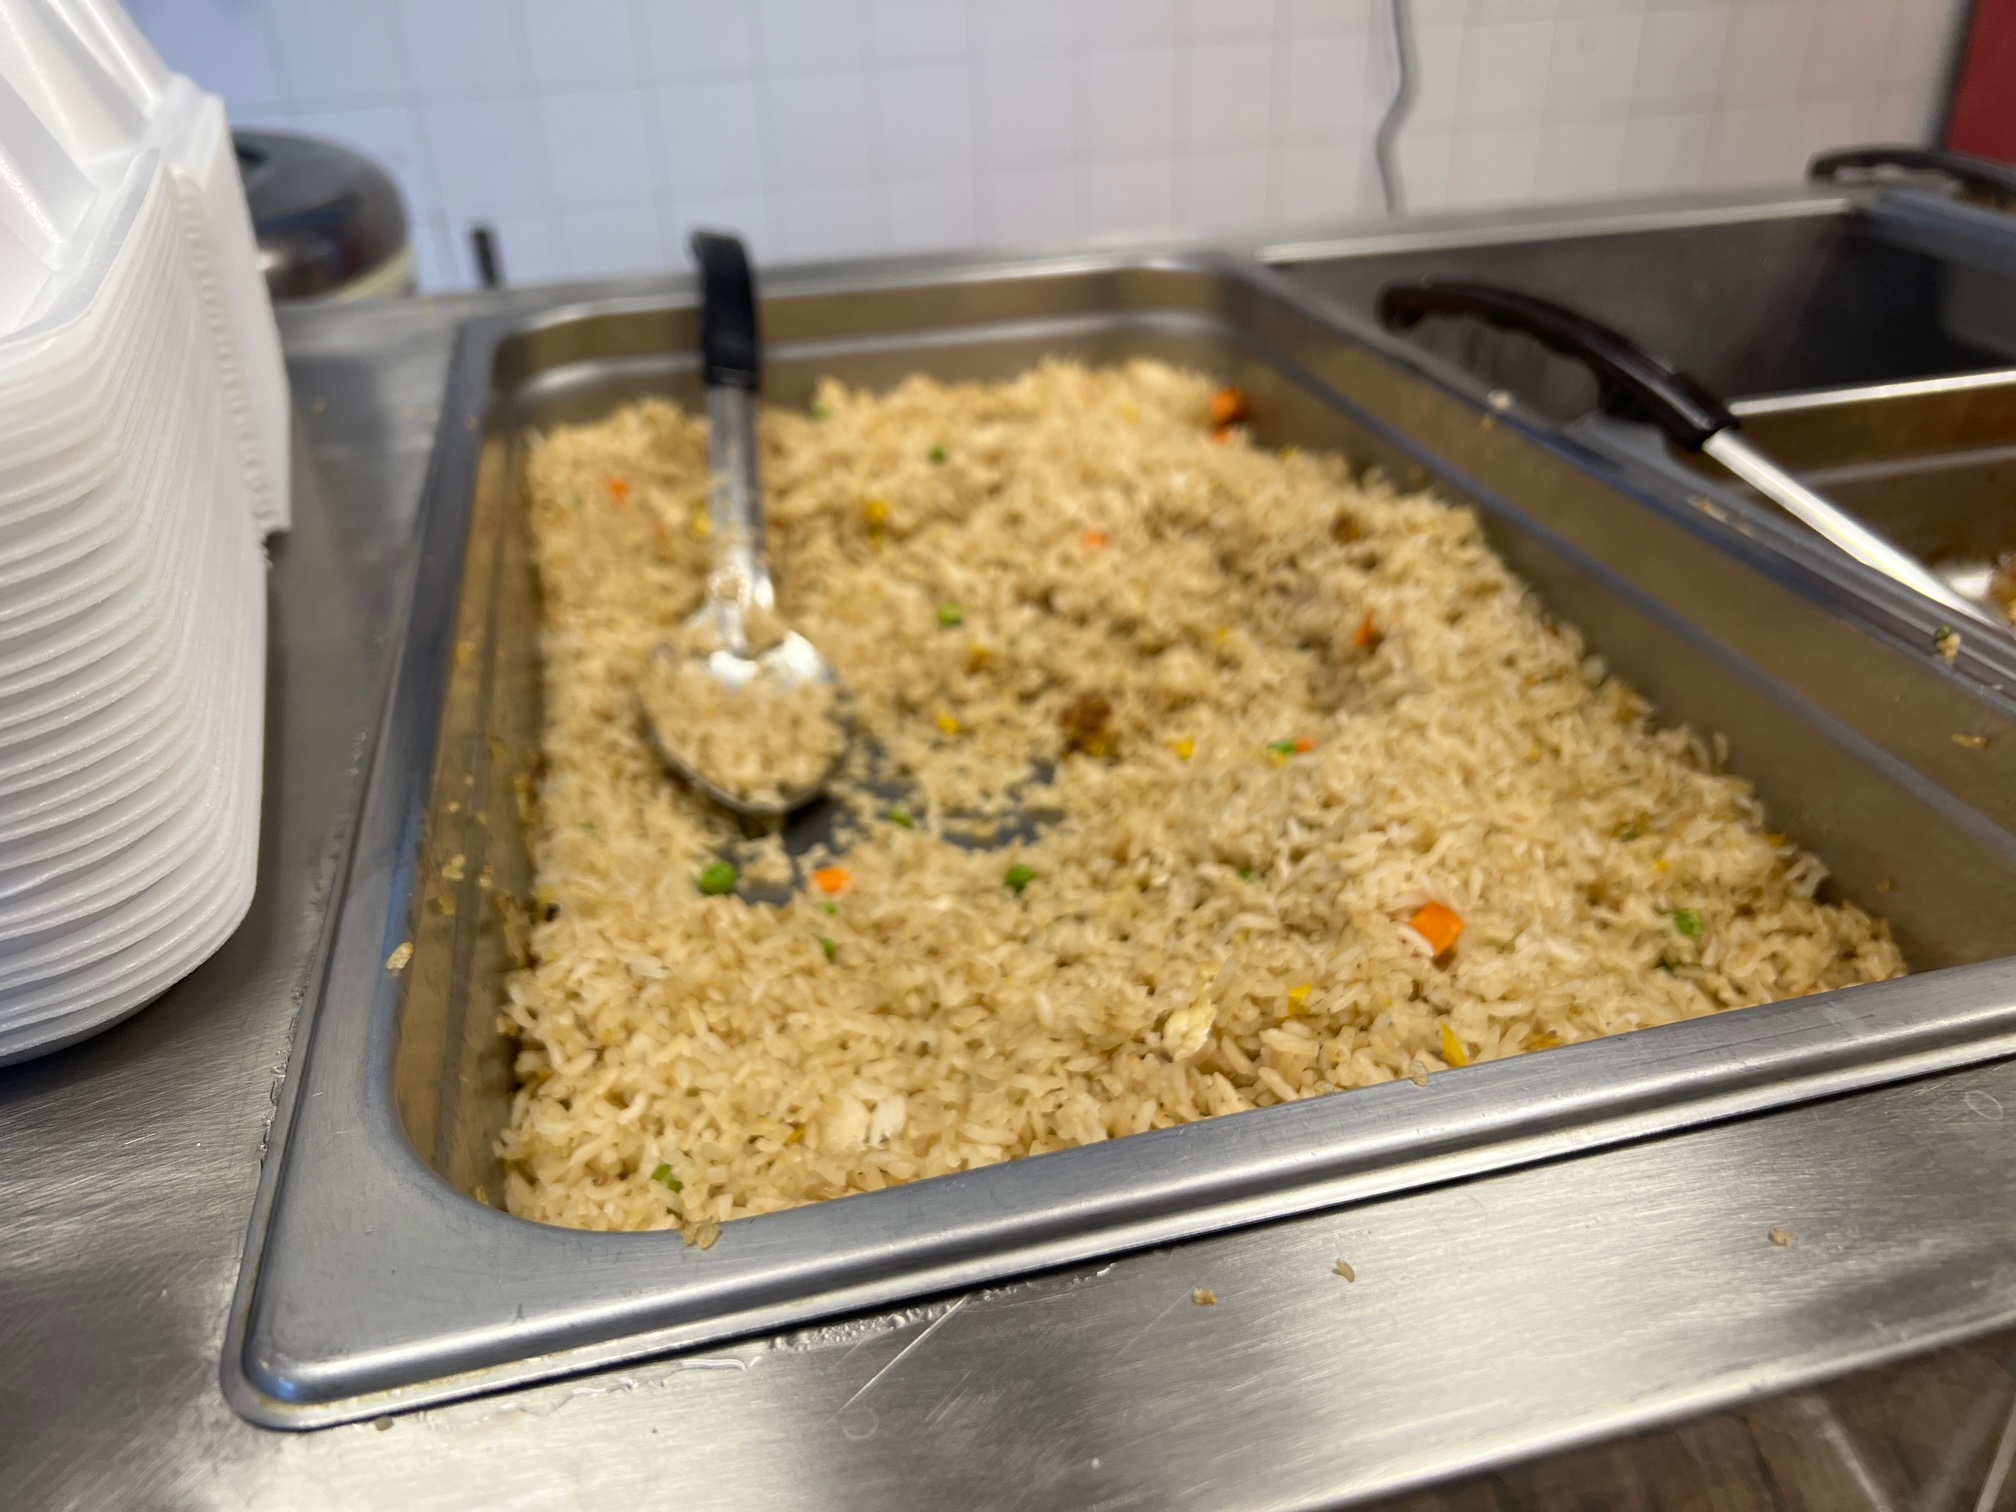 Behind a glass, there is a big metal pan of fried rice. There are small diced carrots, peas, and egg. The serving spoon is resting in the rice with some rice on top. Photo by Alyssa Buckley.